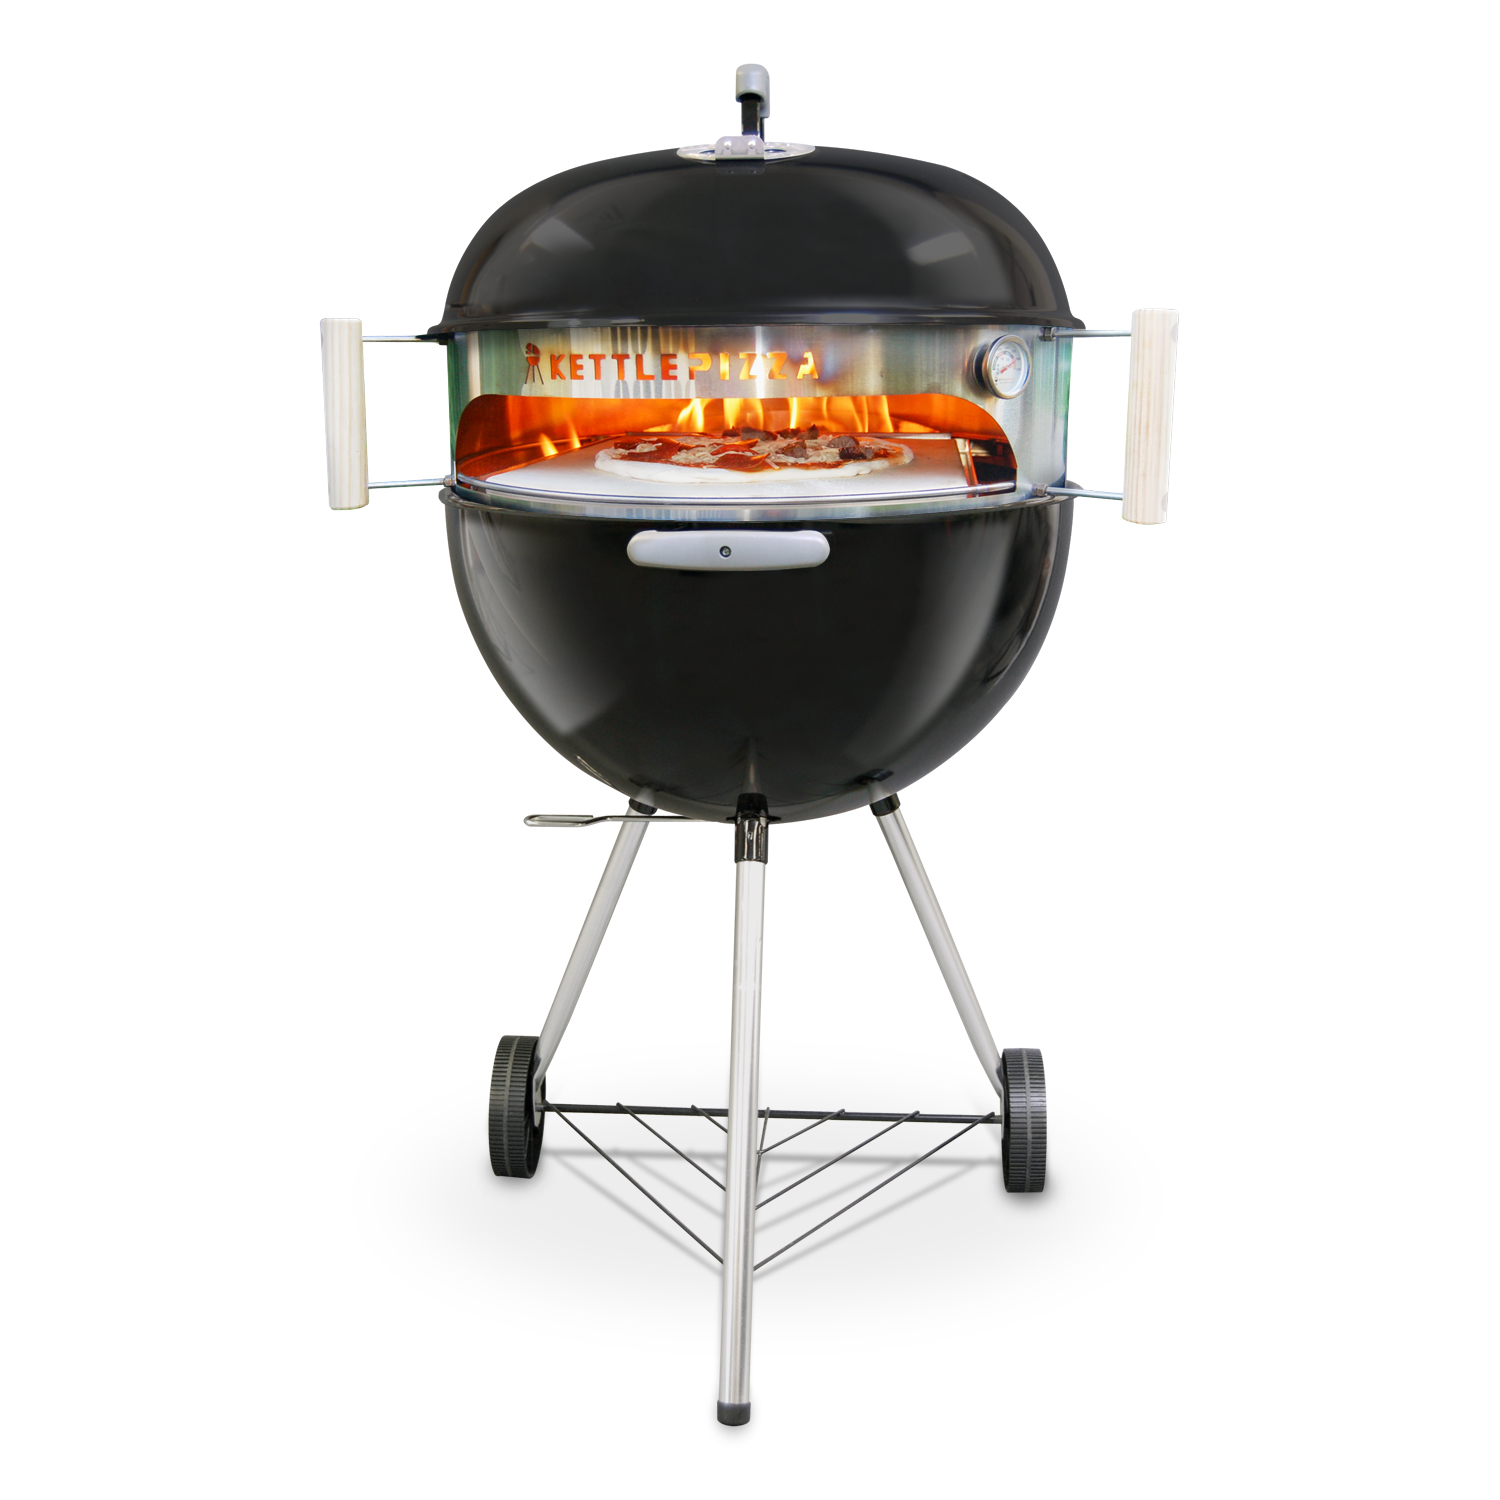 KettlePizza Ovens Teams with HSN to Sell its "Made in the USA" Pizza Oven Grill Kits On HSN.com